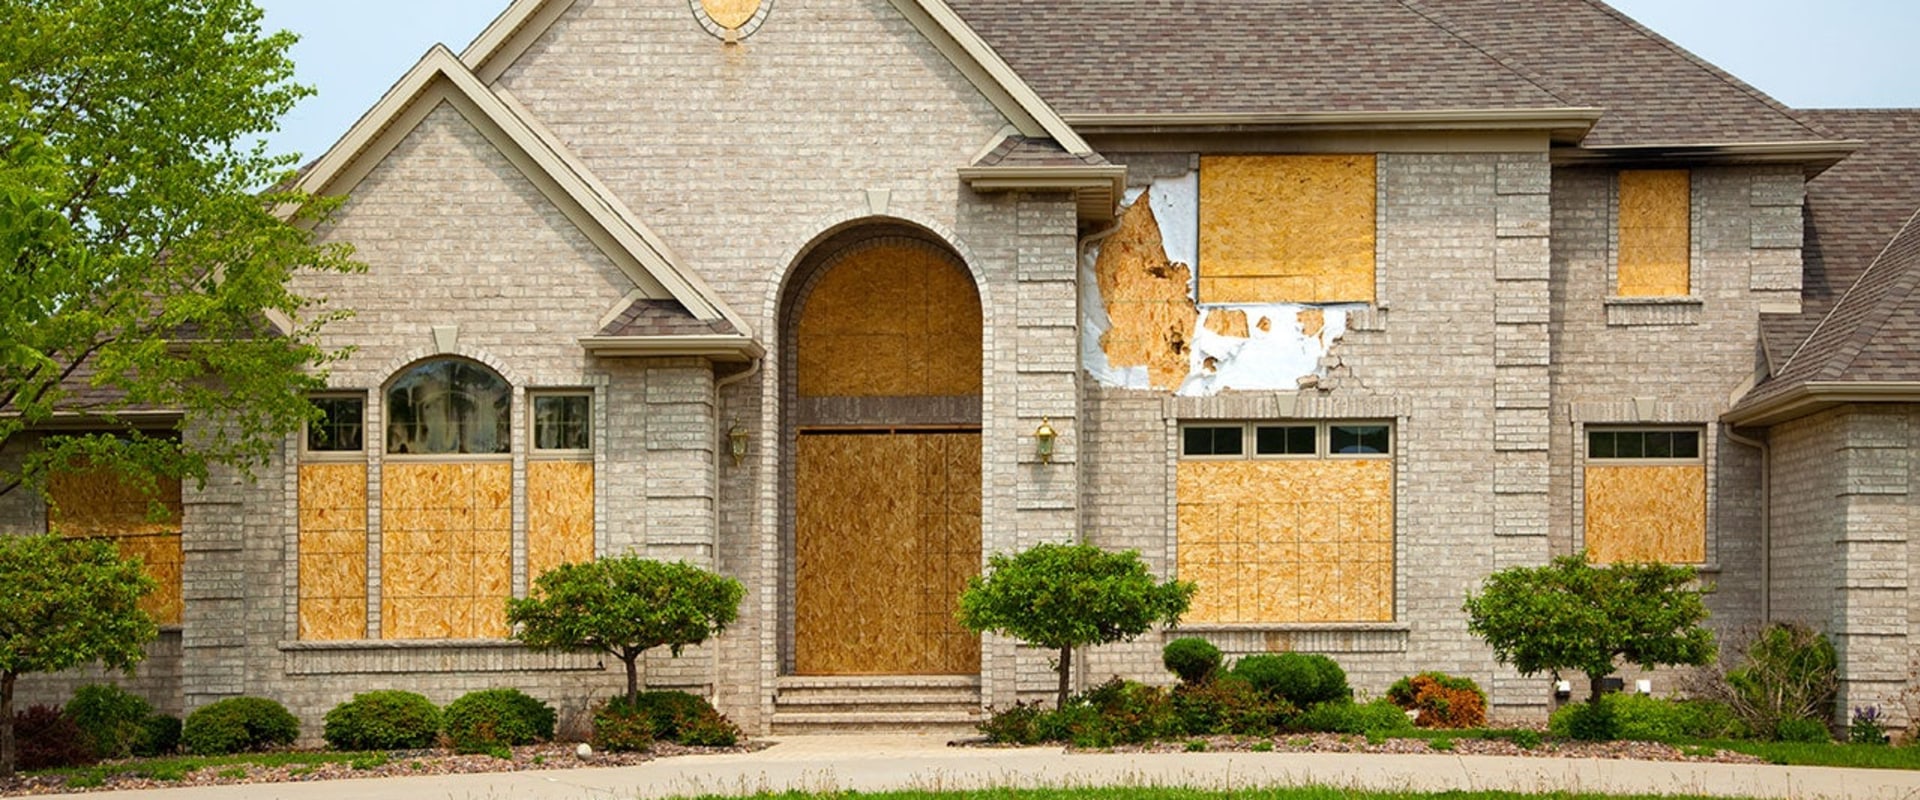 A Comprehensive Guide to Investing in Foreclosures